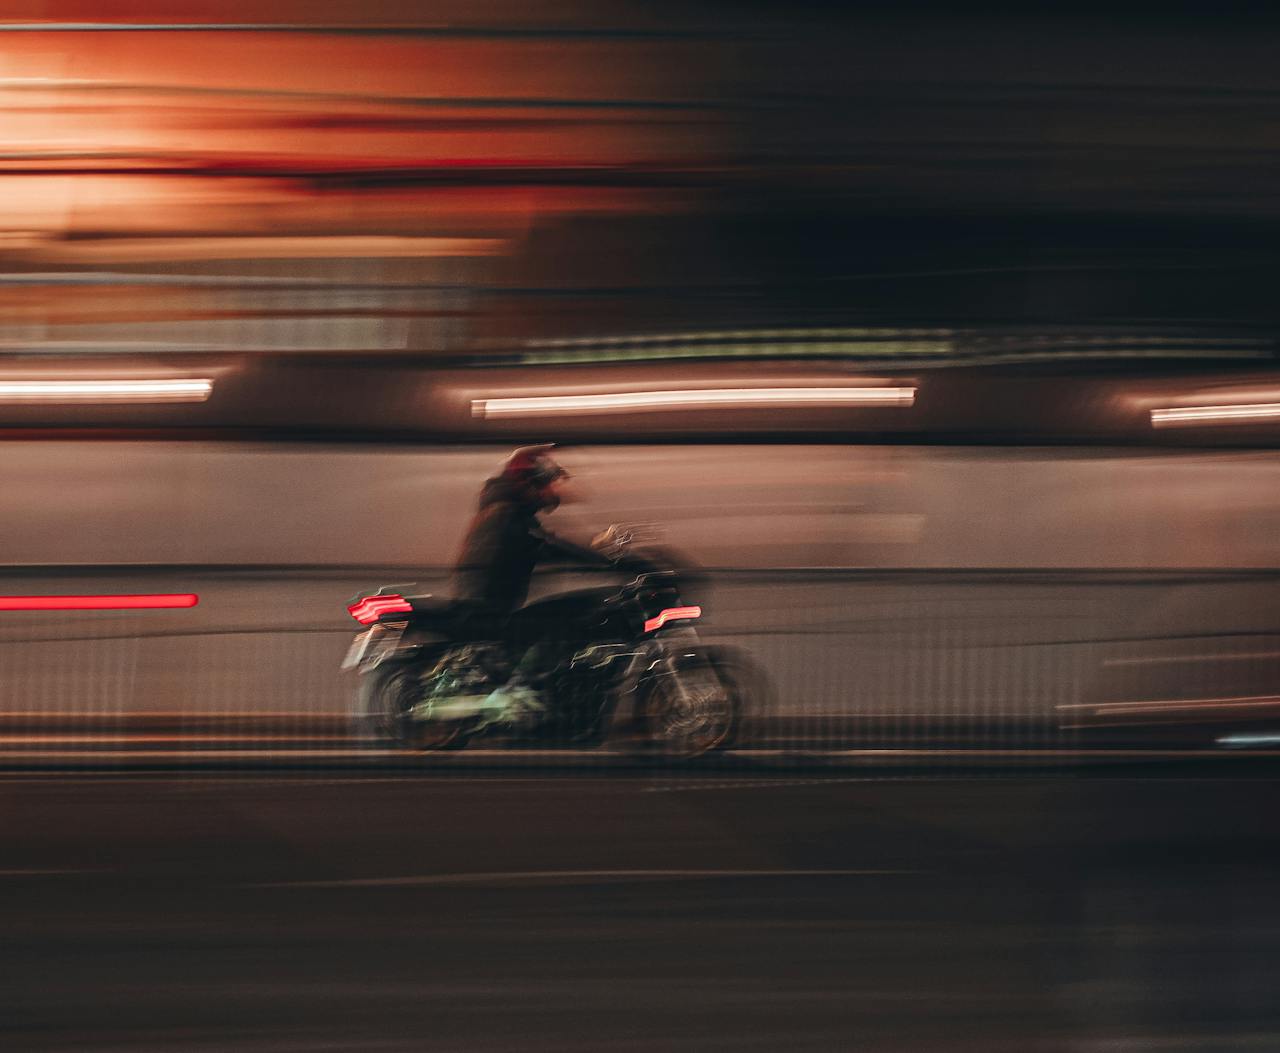 Motorcycle Accident Attorney services